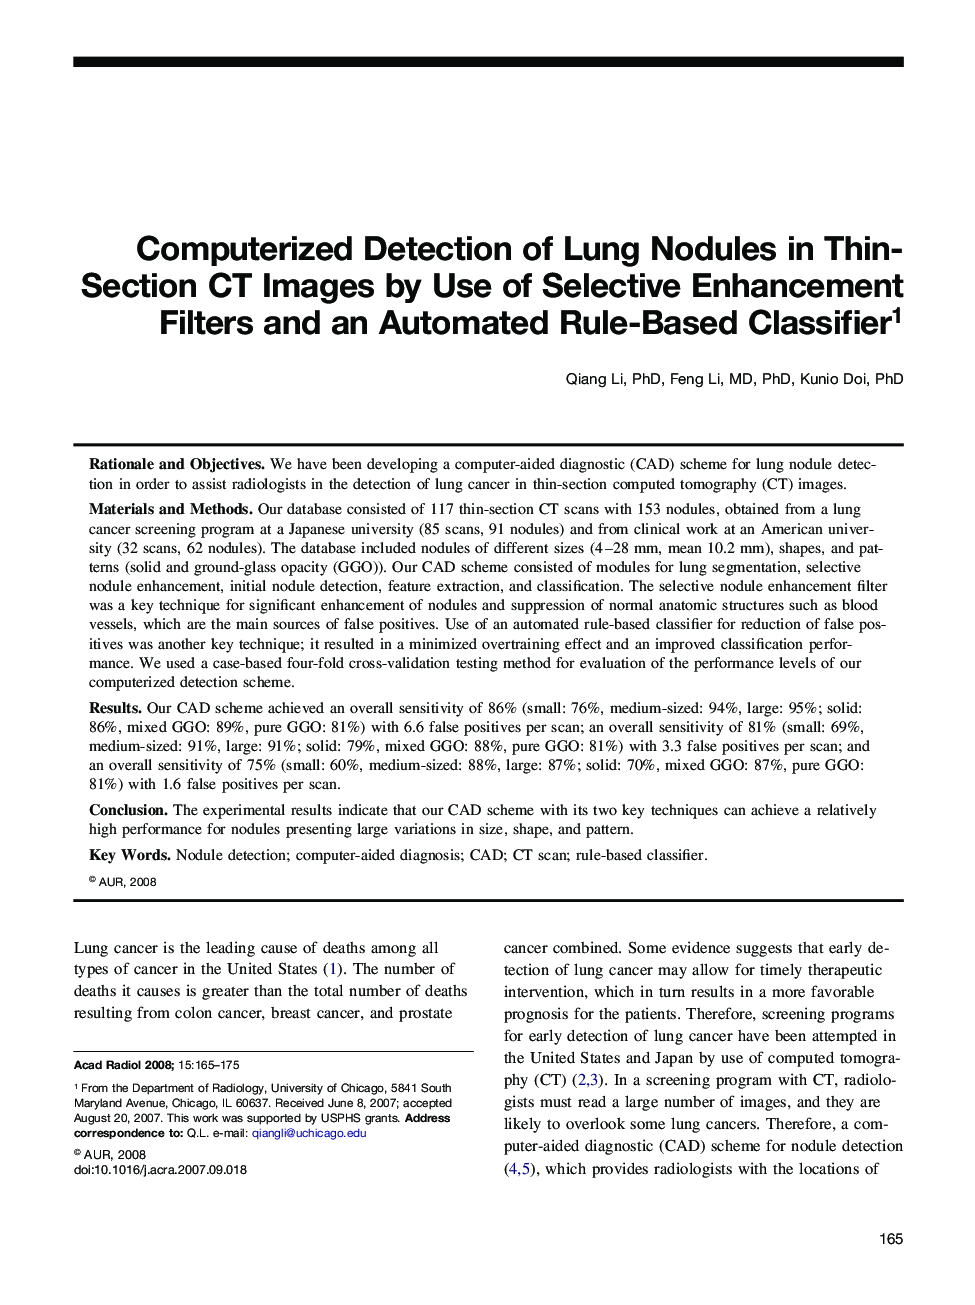 Computerized Detection of Lung Nodules in Thin-Section CT Images by Use of Selective Enhancement Filters and an Automated Rule-Based Classifier